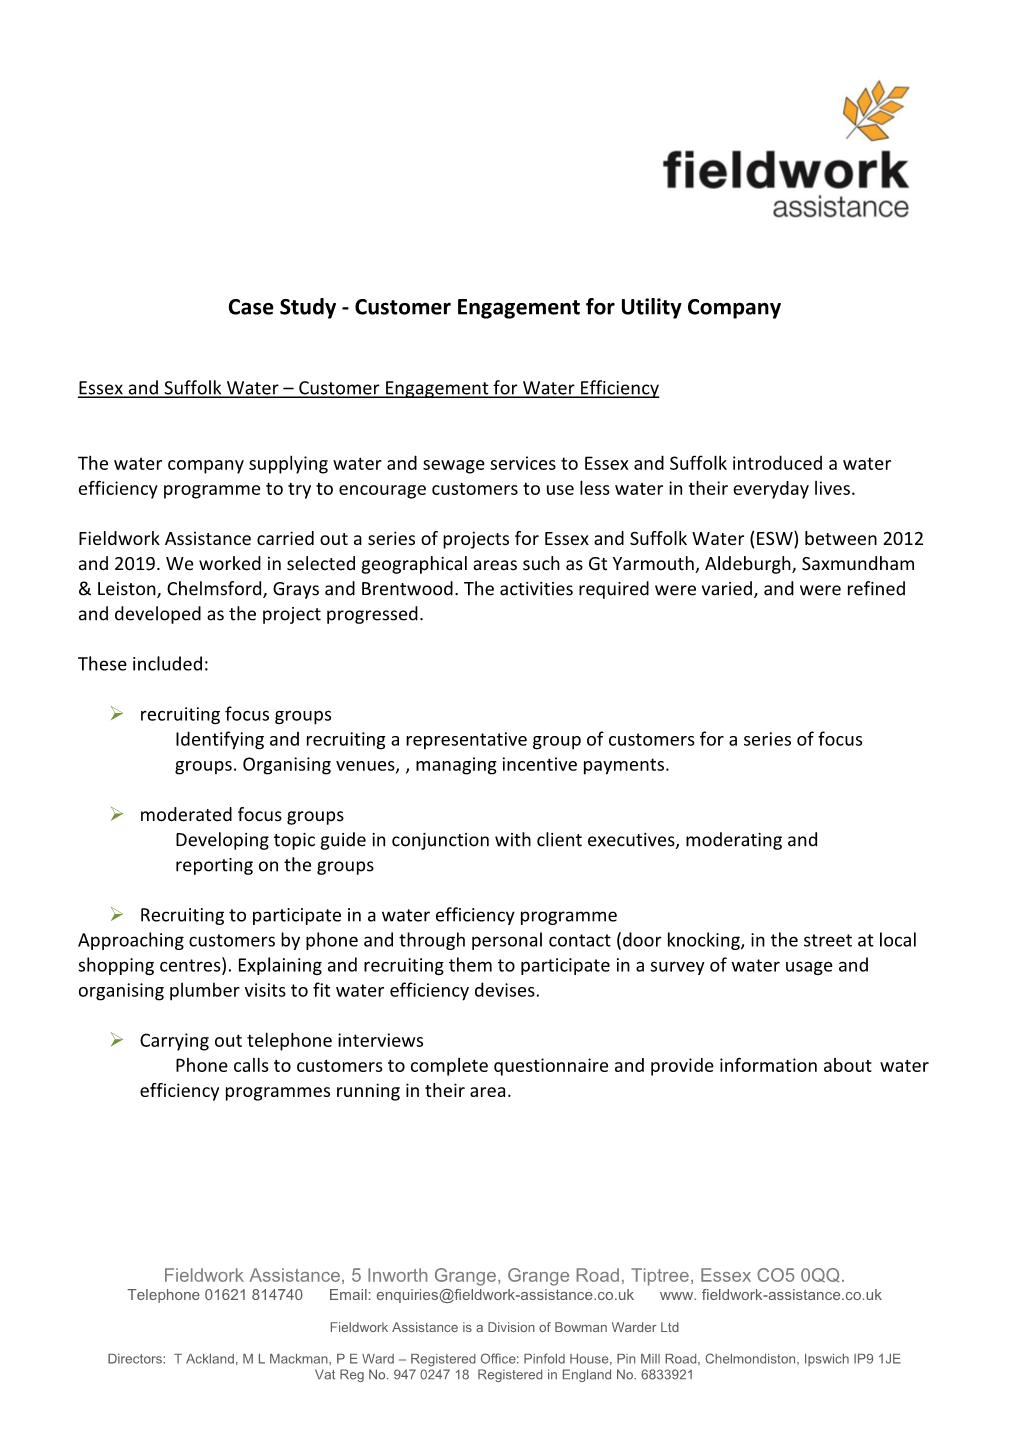 Case Study - Customer Engagement for Utility Company